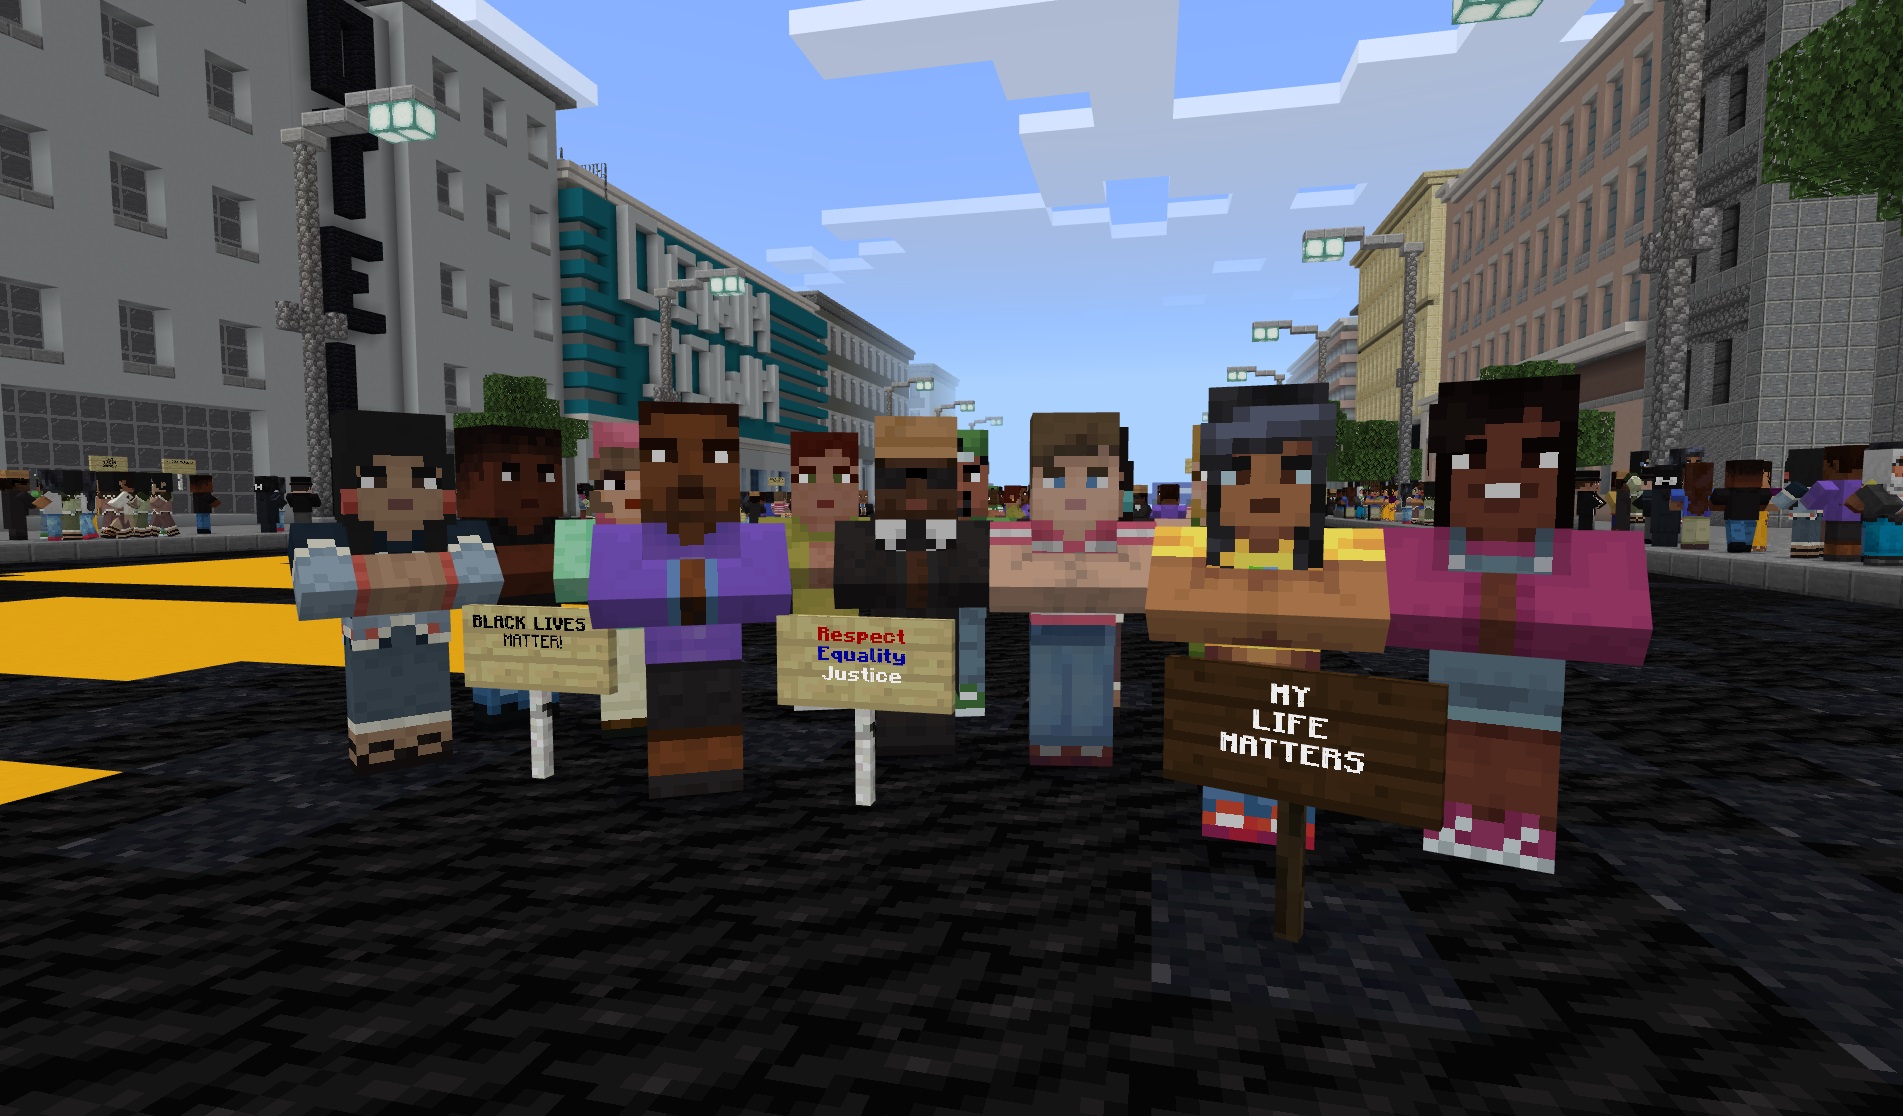 With lessons rooted in social justice movements, Minecraft's Good Trouble  aims to help build a better world - Source